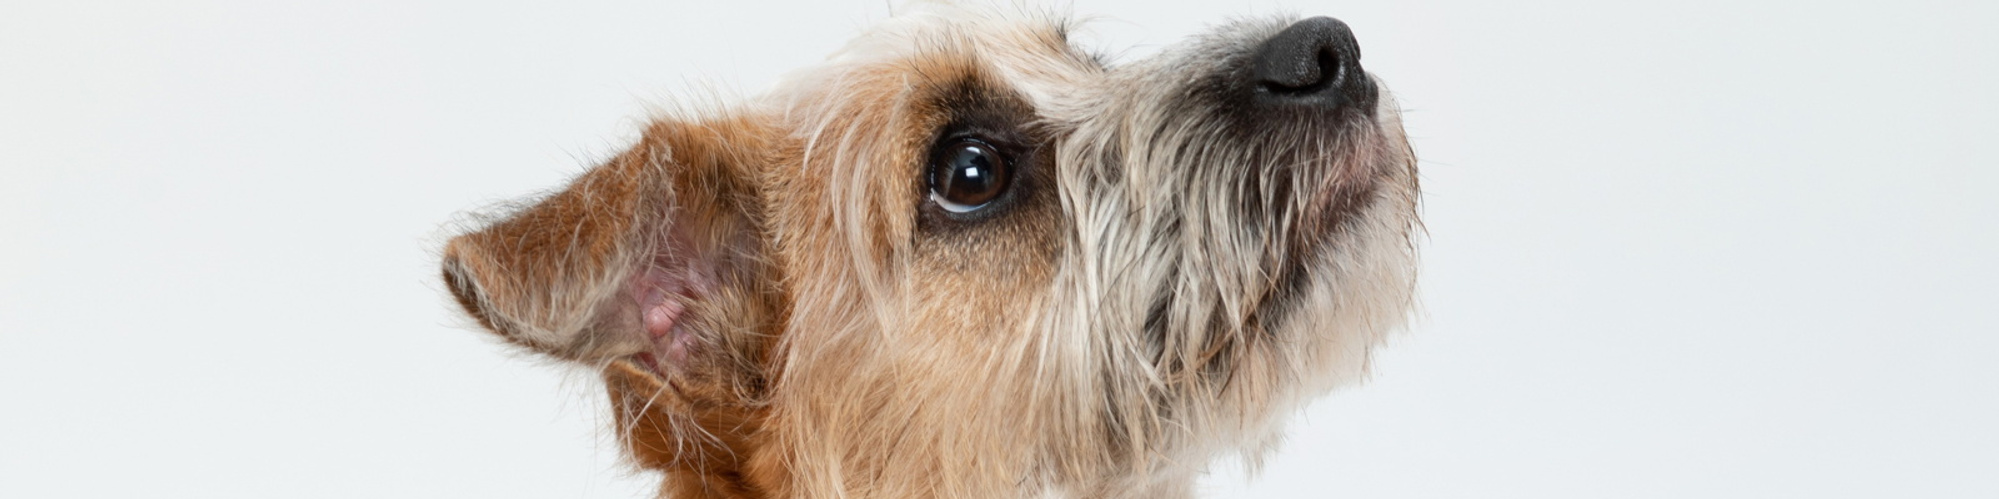 A professional portrait of a small brown and white dog wearing a red and grey collar looking up at the camera. Taken in a professional family and pet photography studio in Dublin with a white background.